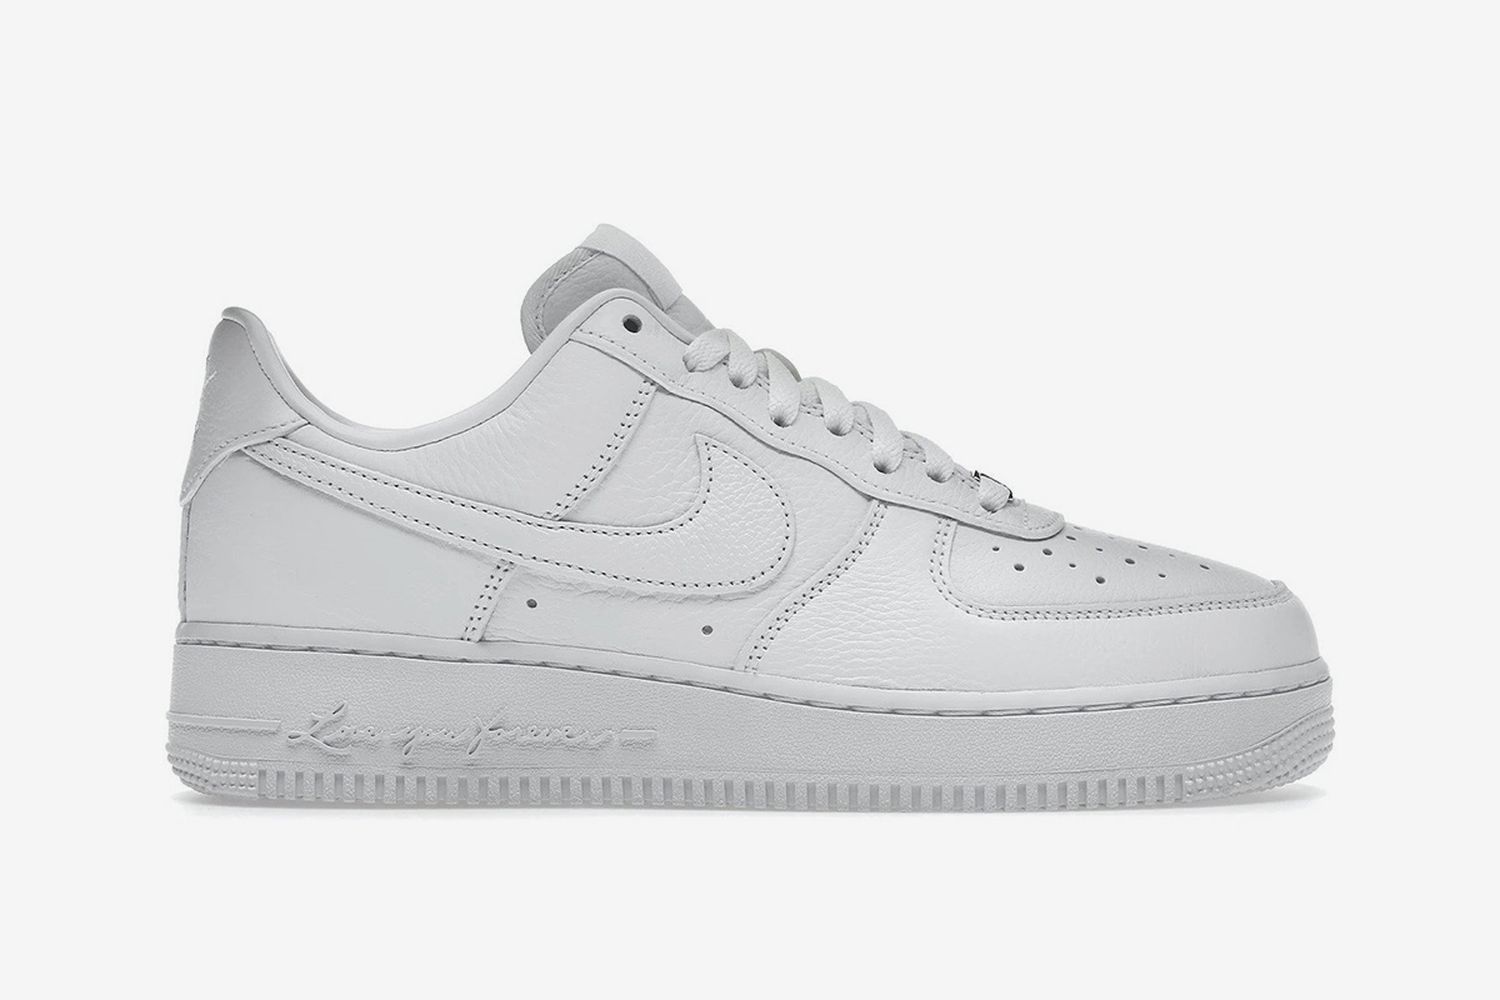 Air Force 1 Low "Certified Lover Boy"